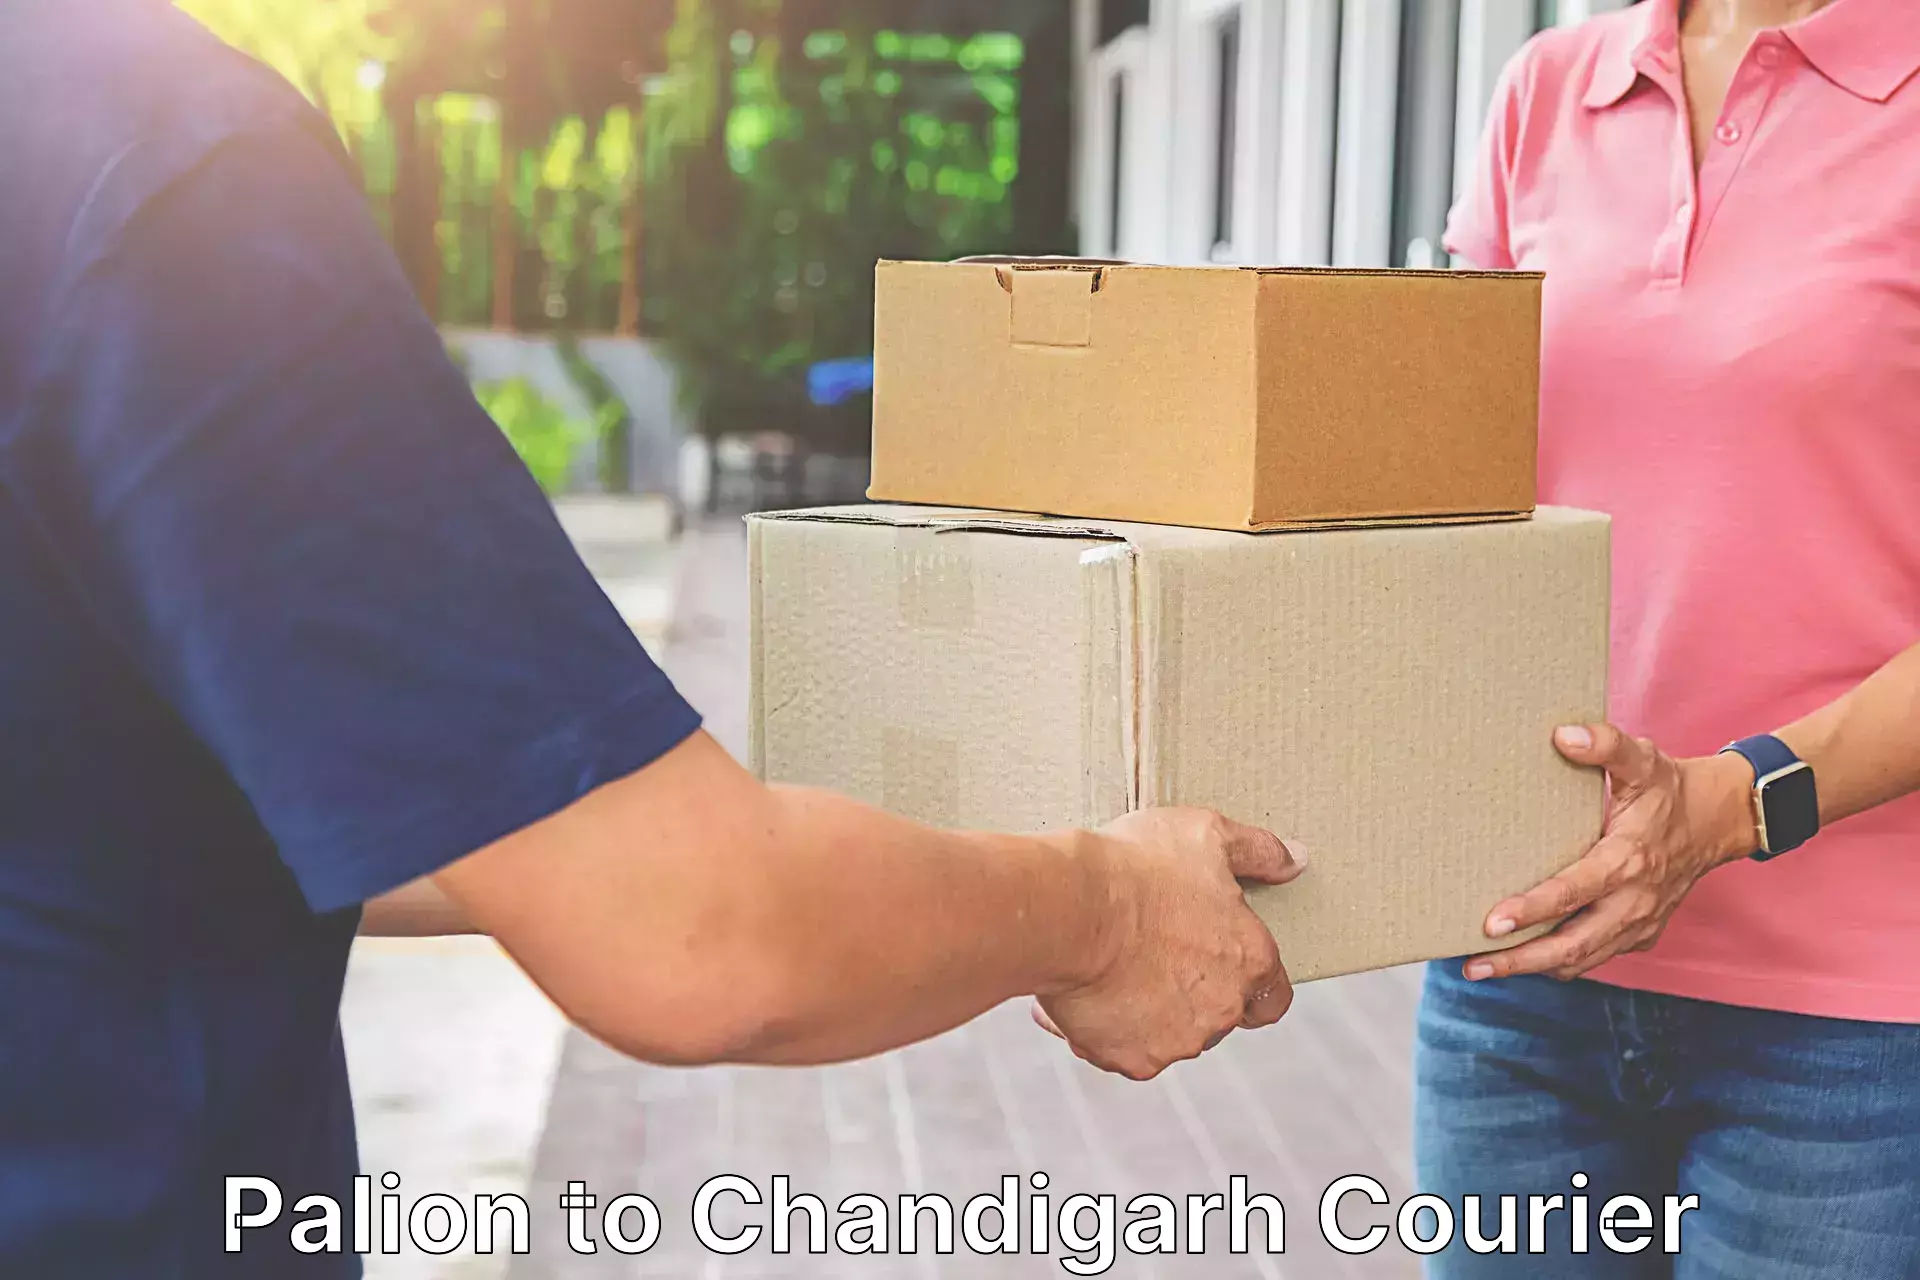 Advanced tracking systems Palion to Chandigarh